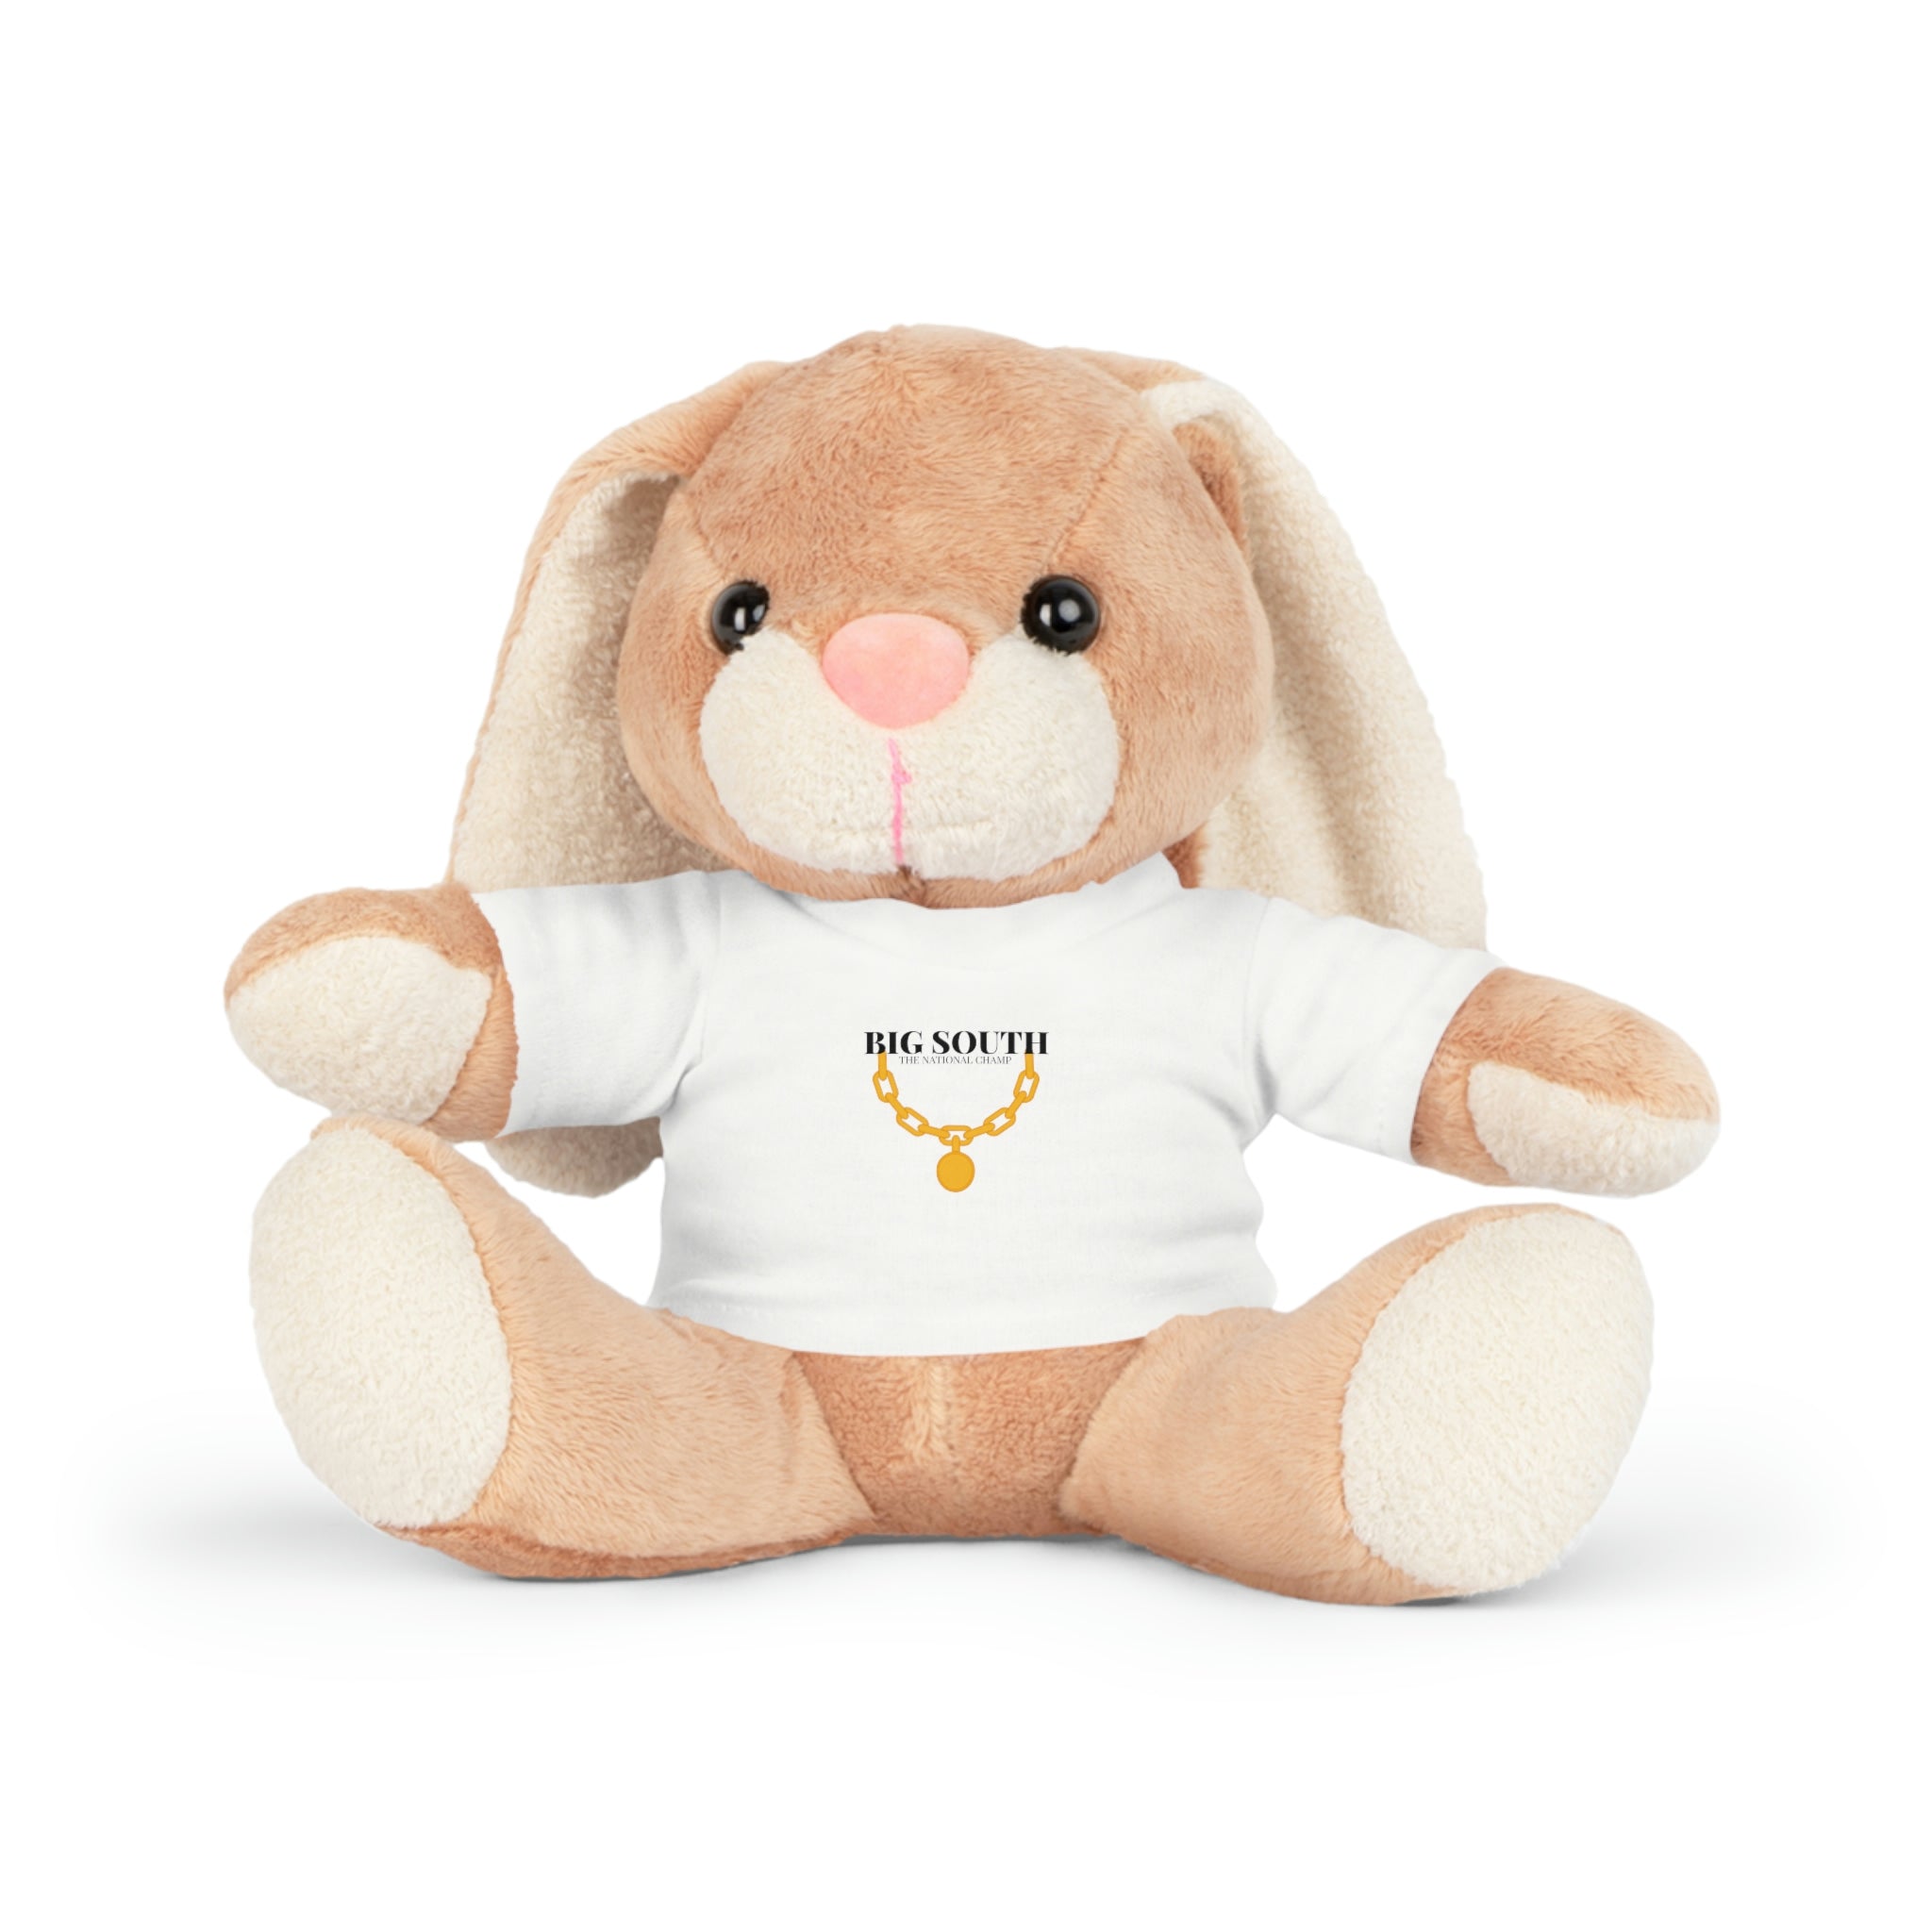 "Big South" Plush Toy with T-Shirt